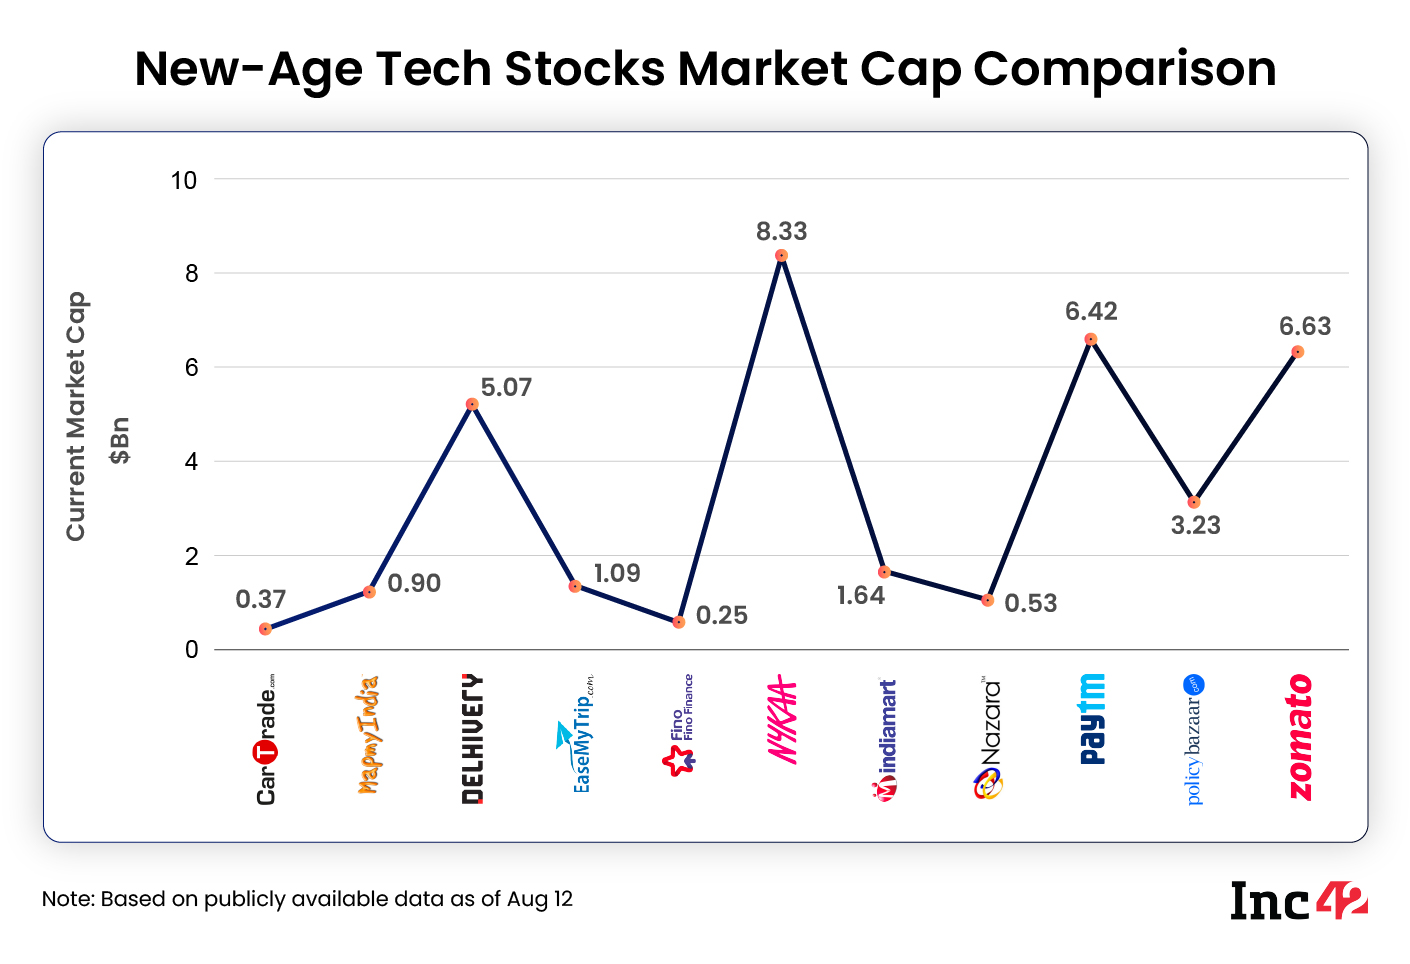 New-Age Tech Stocks This Week: Weak Q1 Results Hit Delhivery, Zomato Biggest Gainer